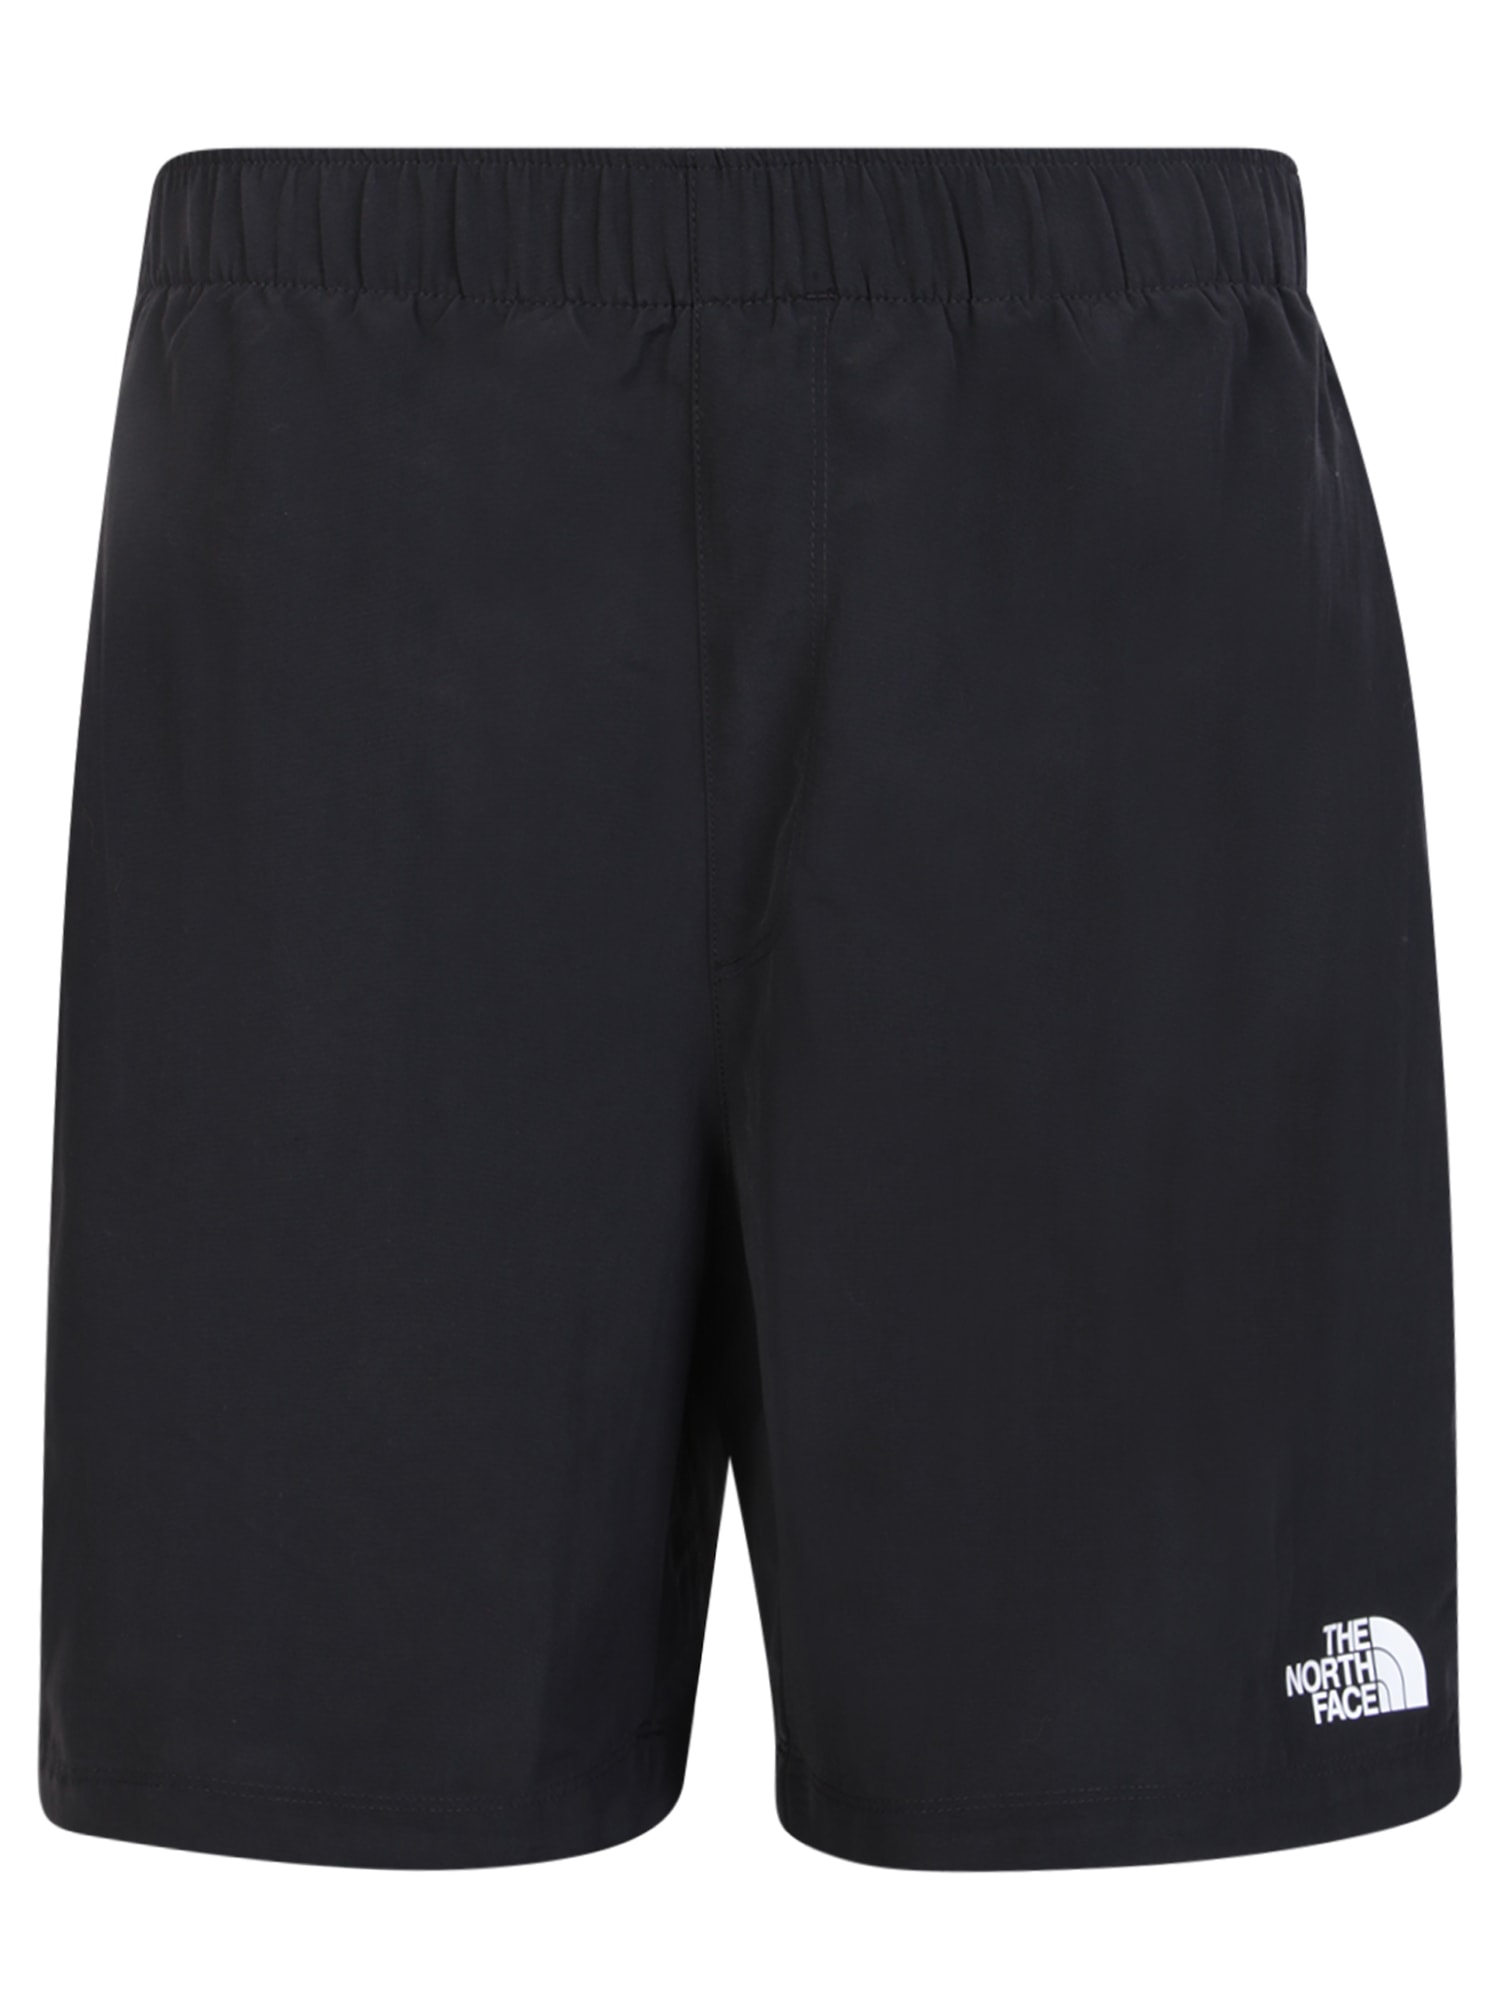 Shorts Dry Water